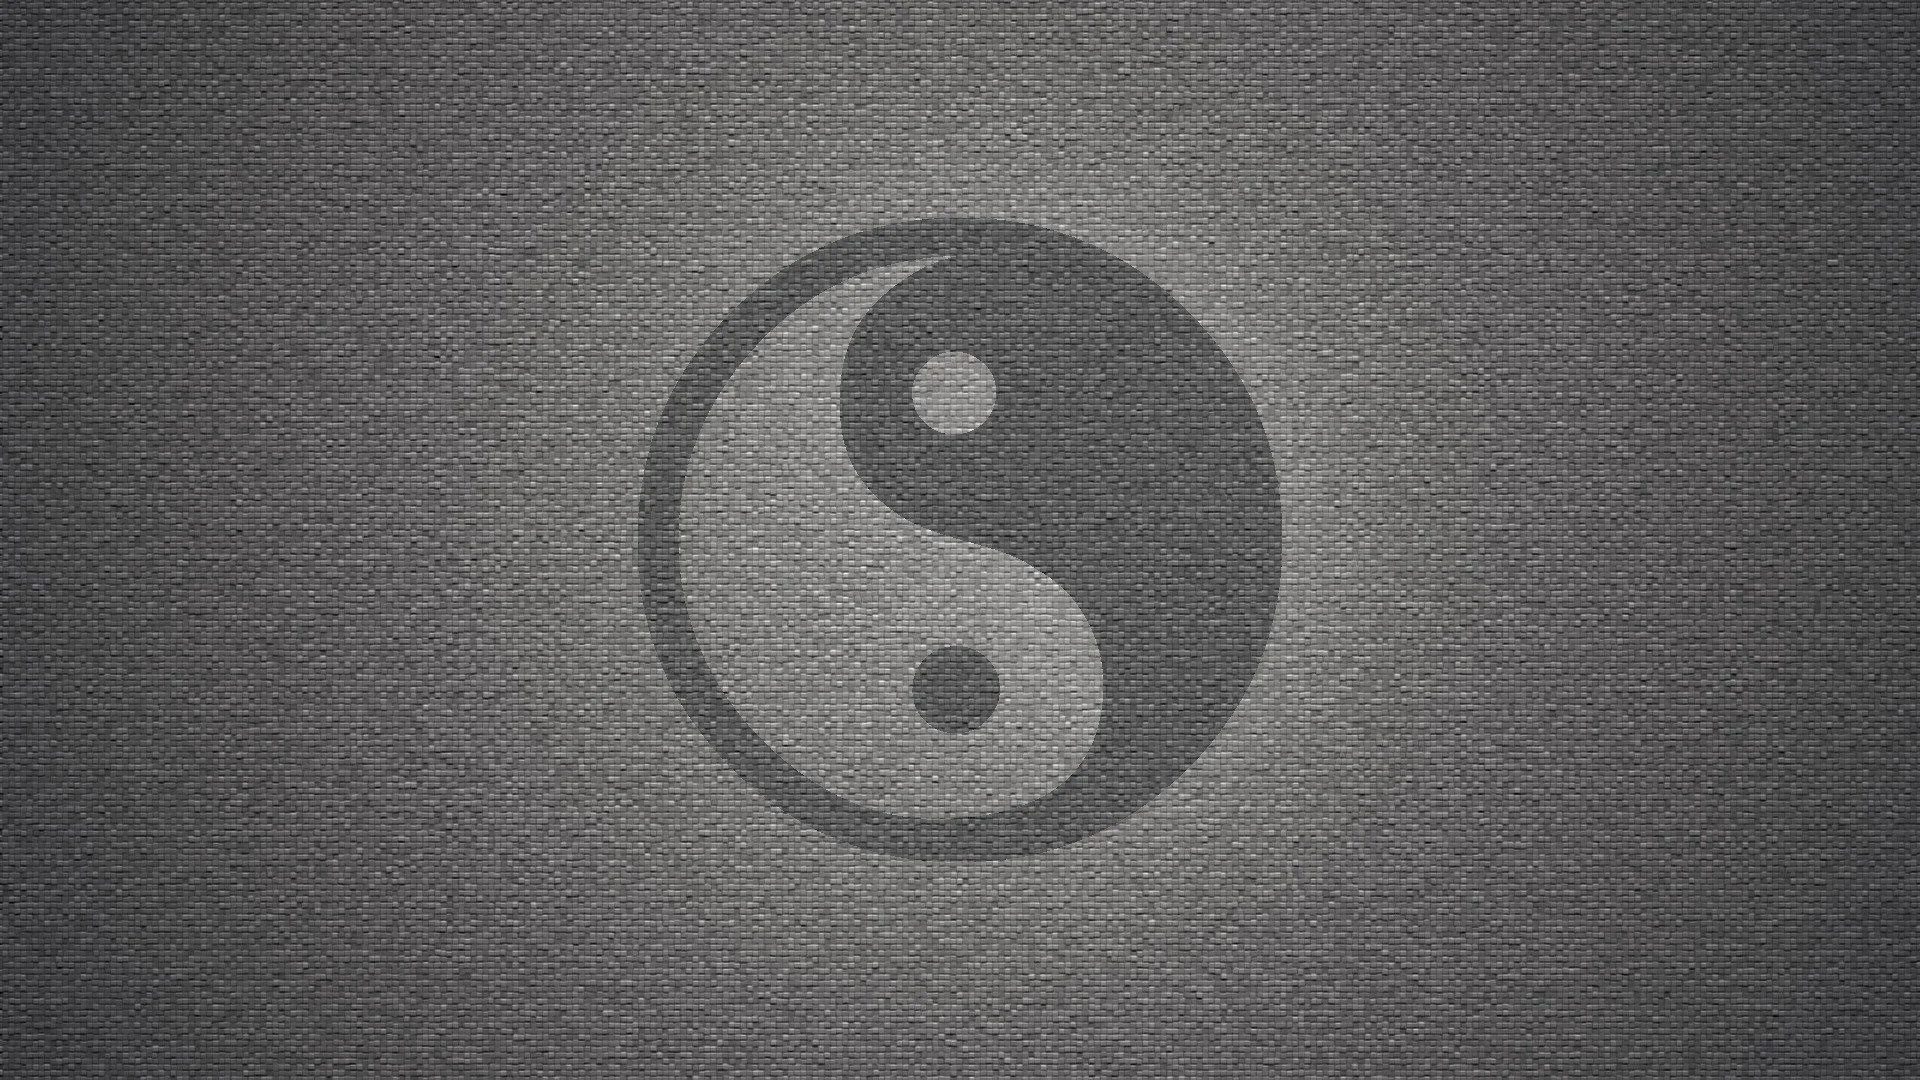 Wall yin yang symbol textures grayscale backgrounds symbols wallpaper |  | 288519 | WallpaperUP